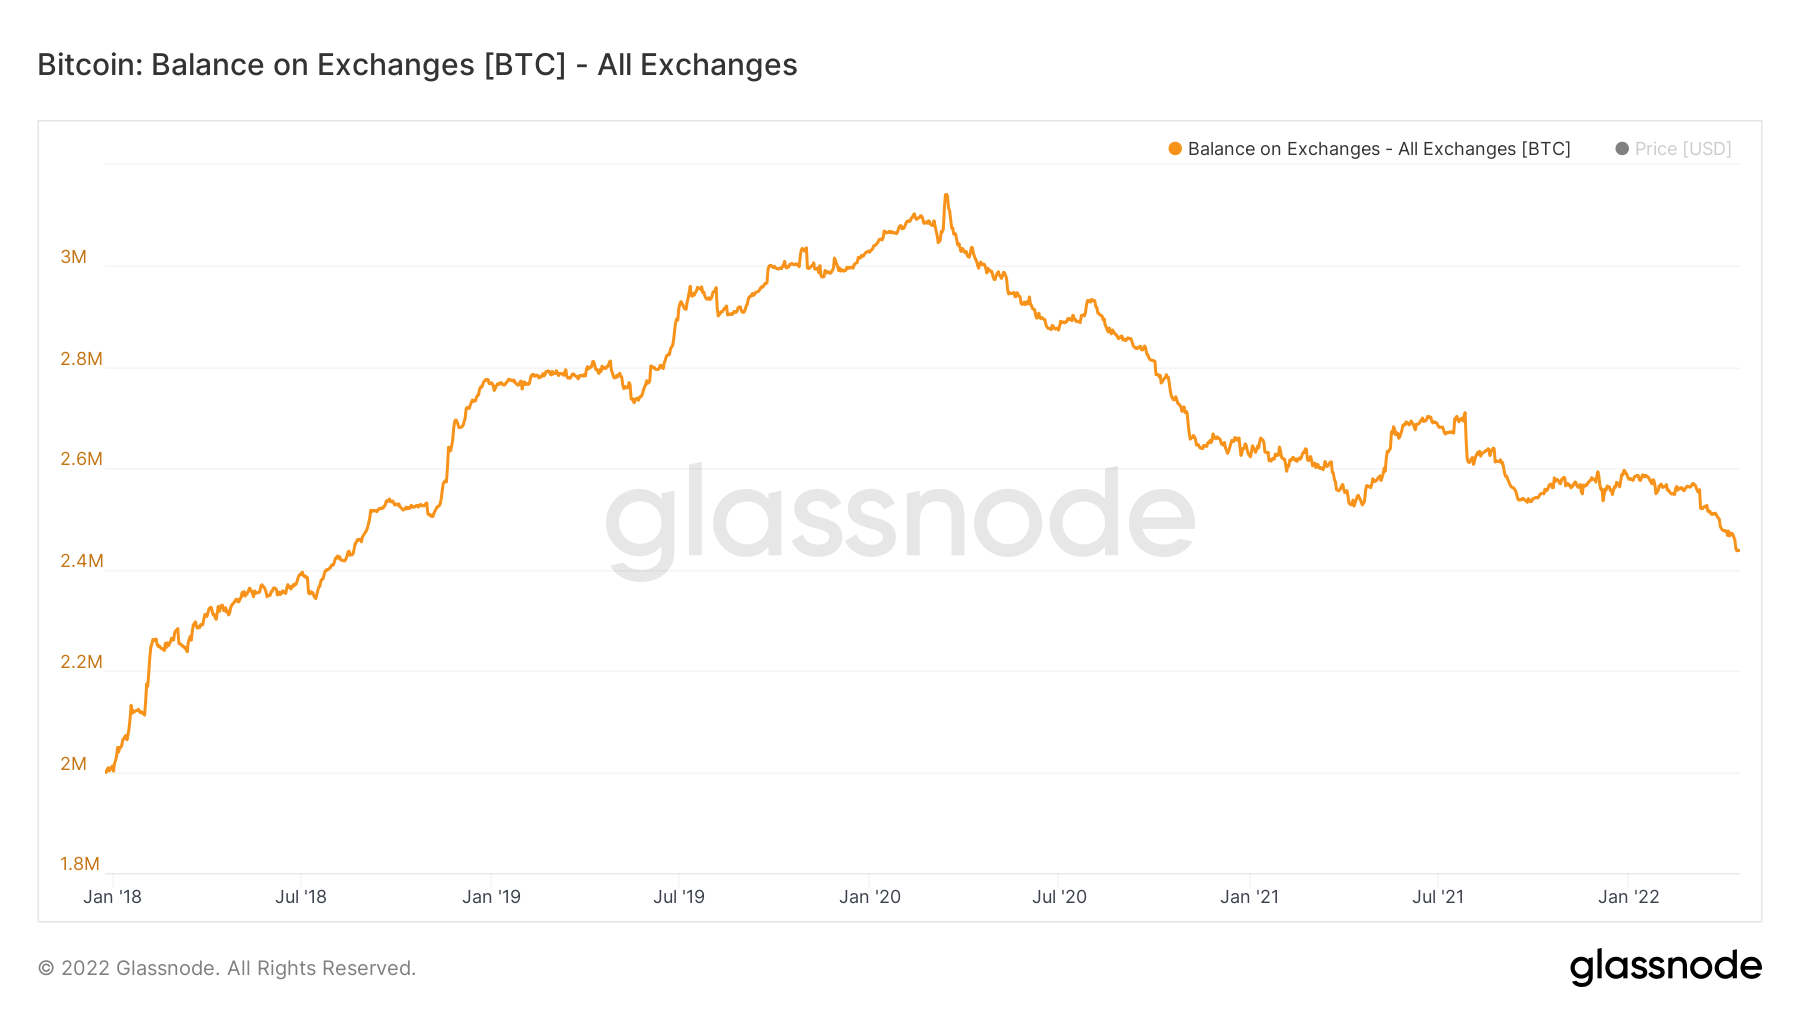 Glassnode chart showing the declining number of Bitcoin held on exchanges.